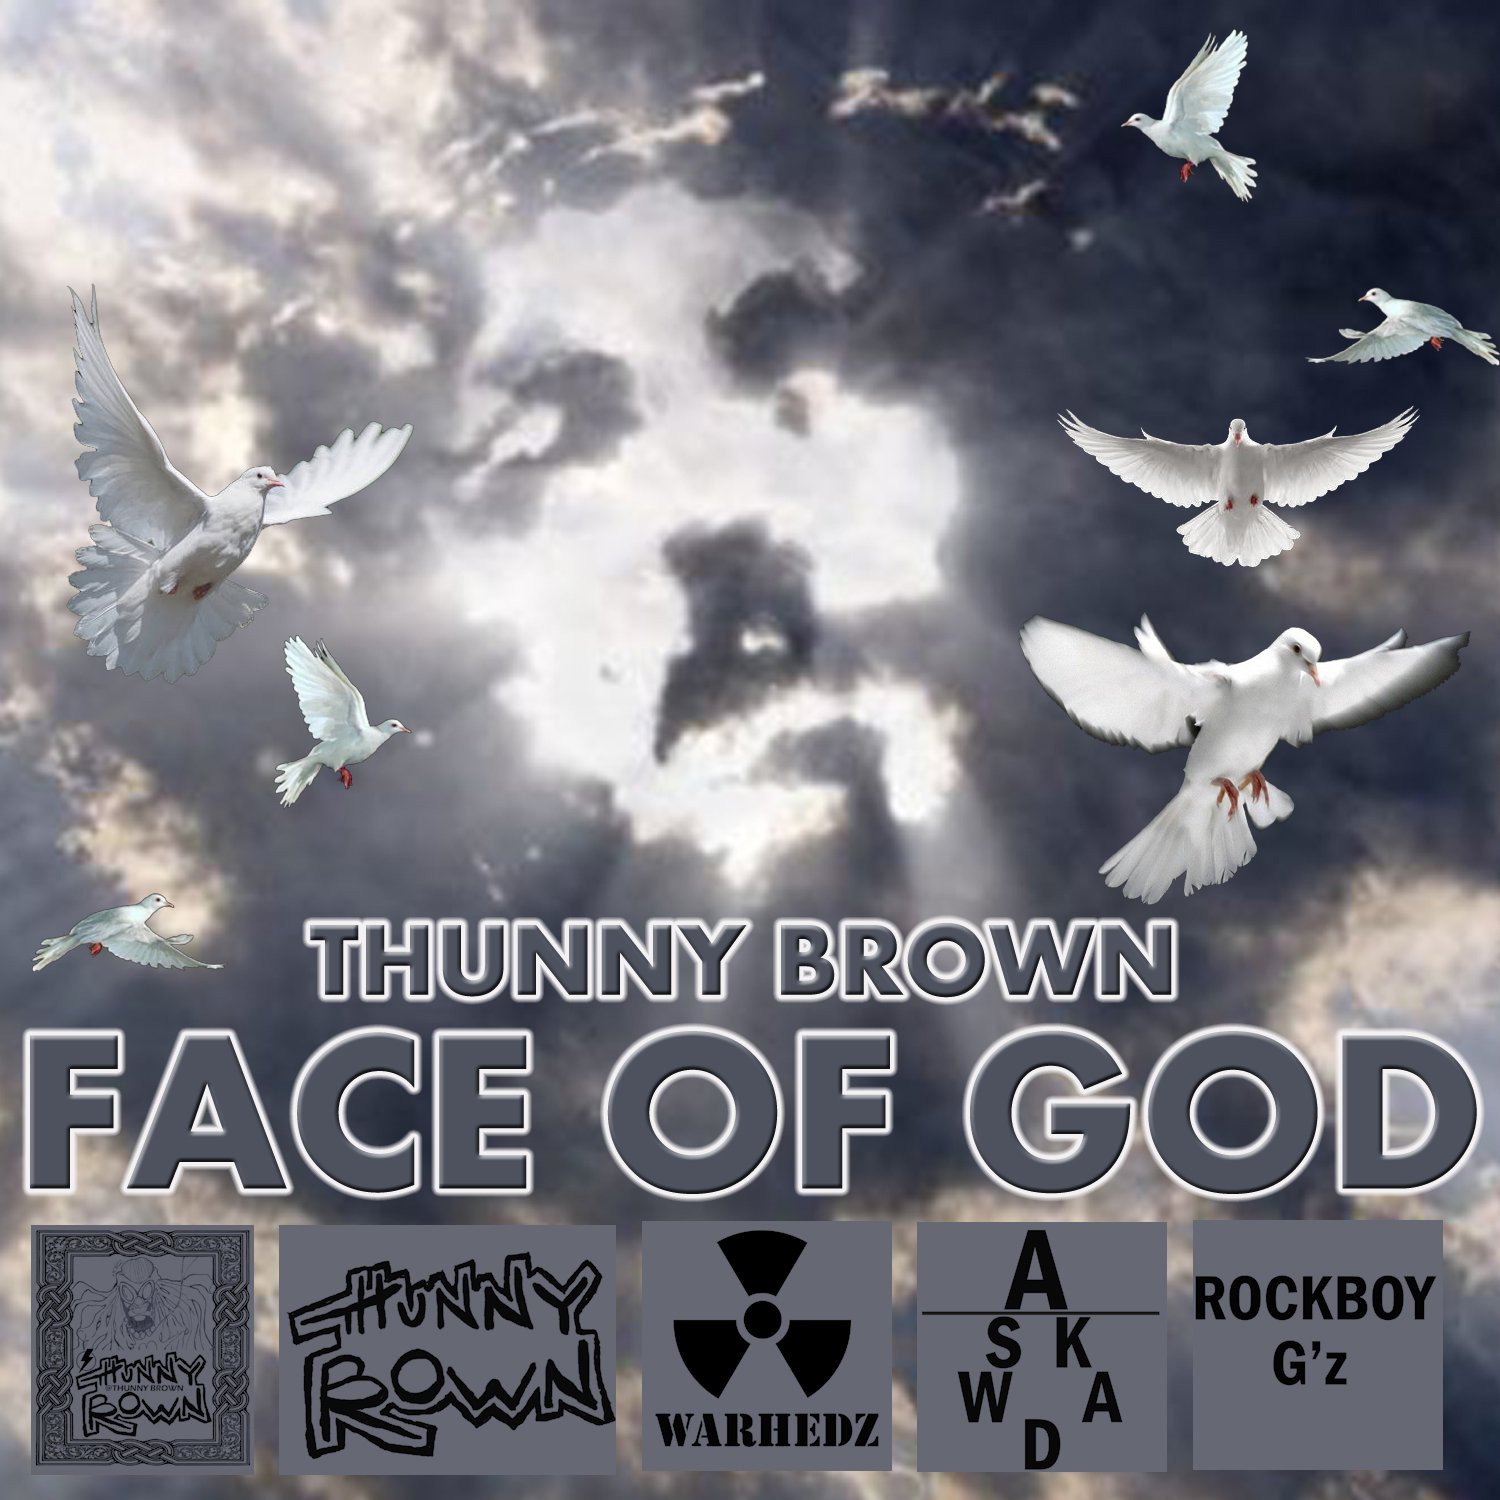 Art for FACE OF GOD by THUNNY BROWN